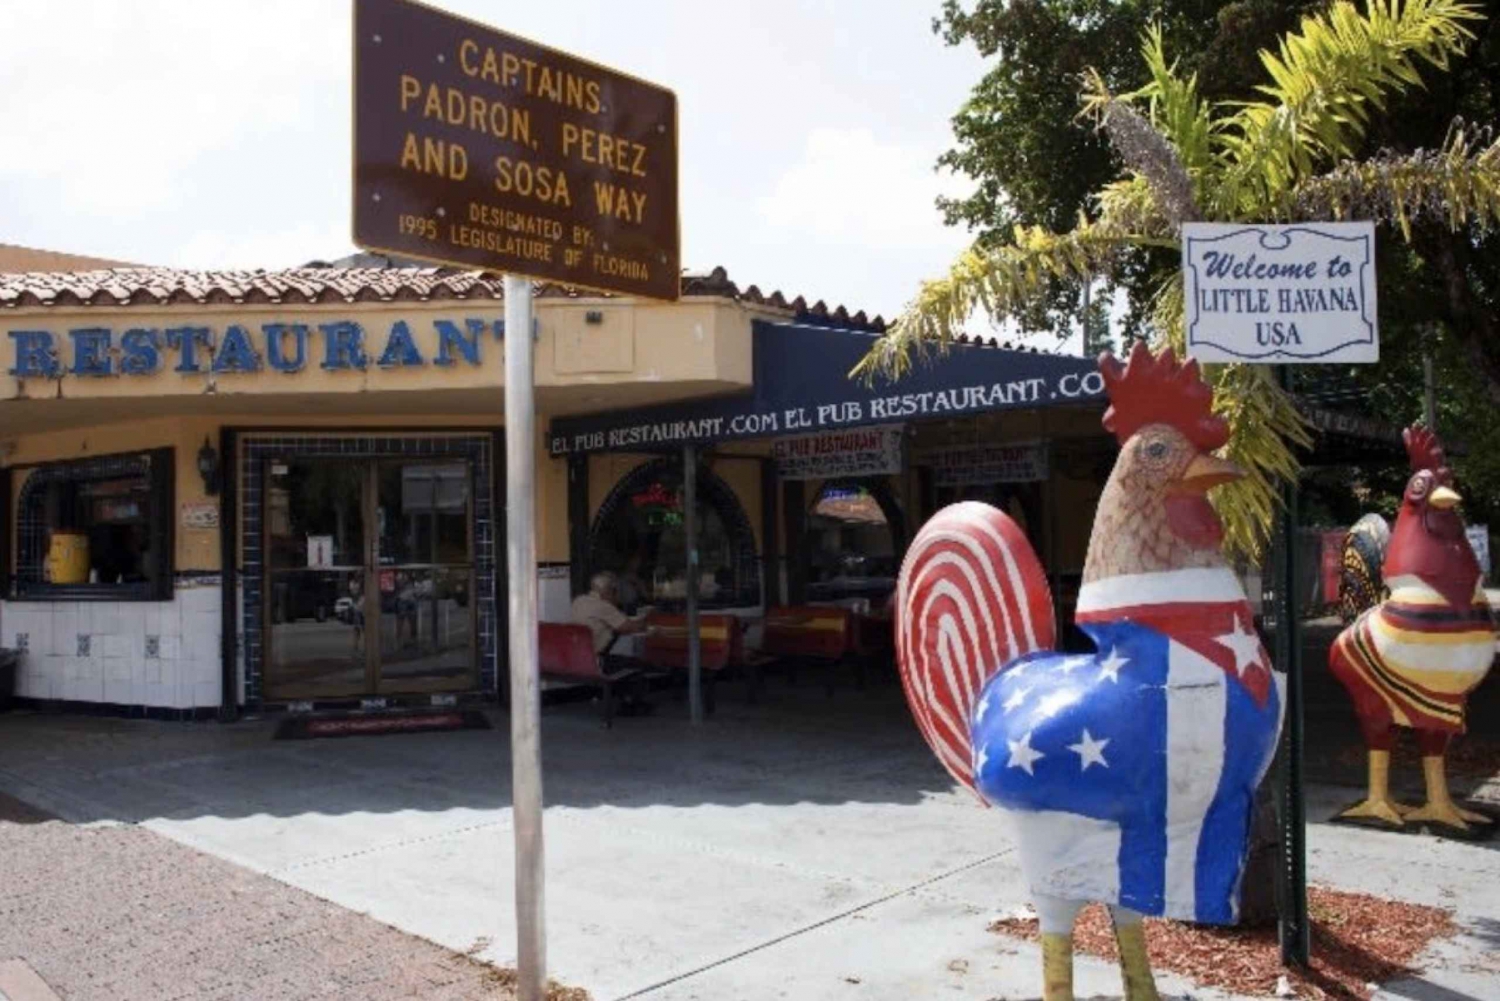 Miami: Guided Small Group Little Havana Food Tour